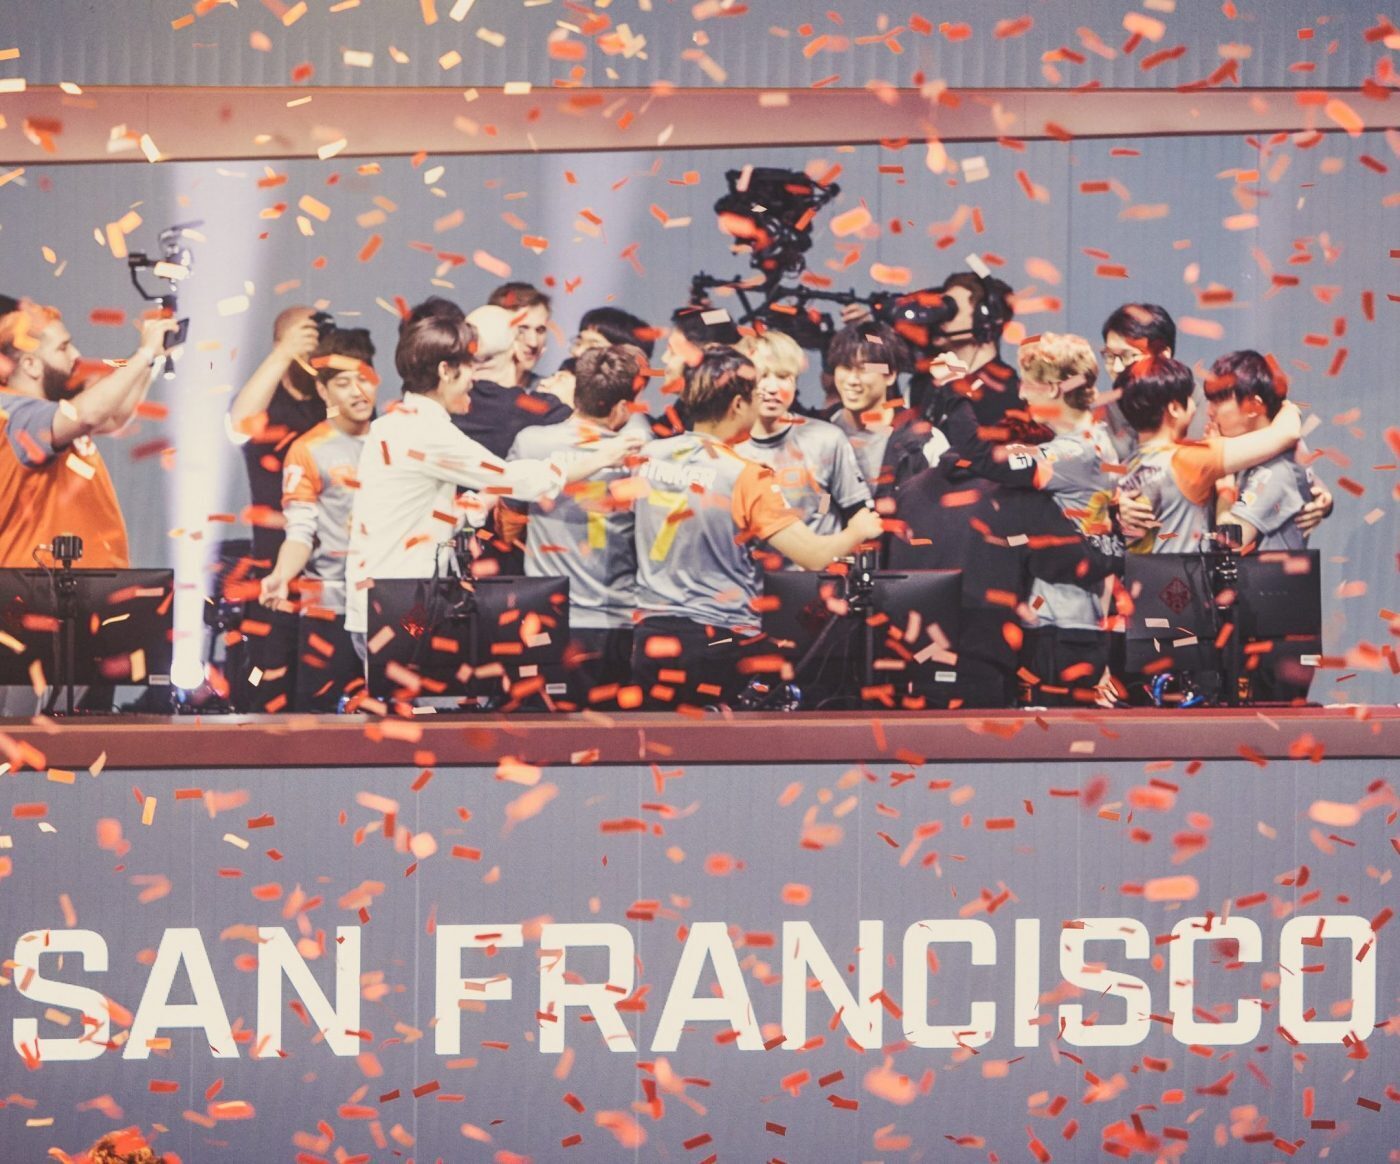 The San Francisco Shock won the Overwatch League 2019 Stage Two Playoffs. {Image courtesy of Blizzard}